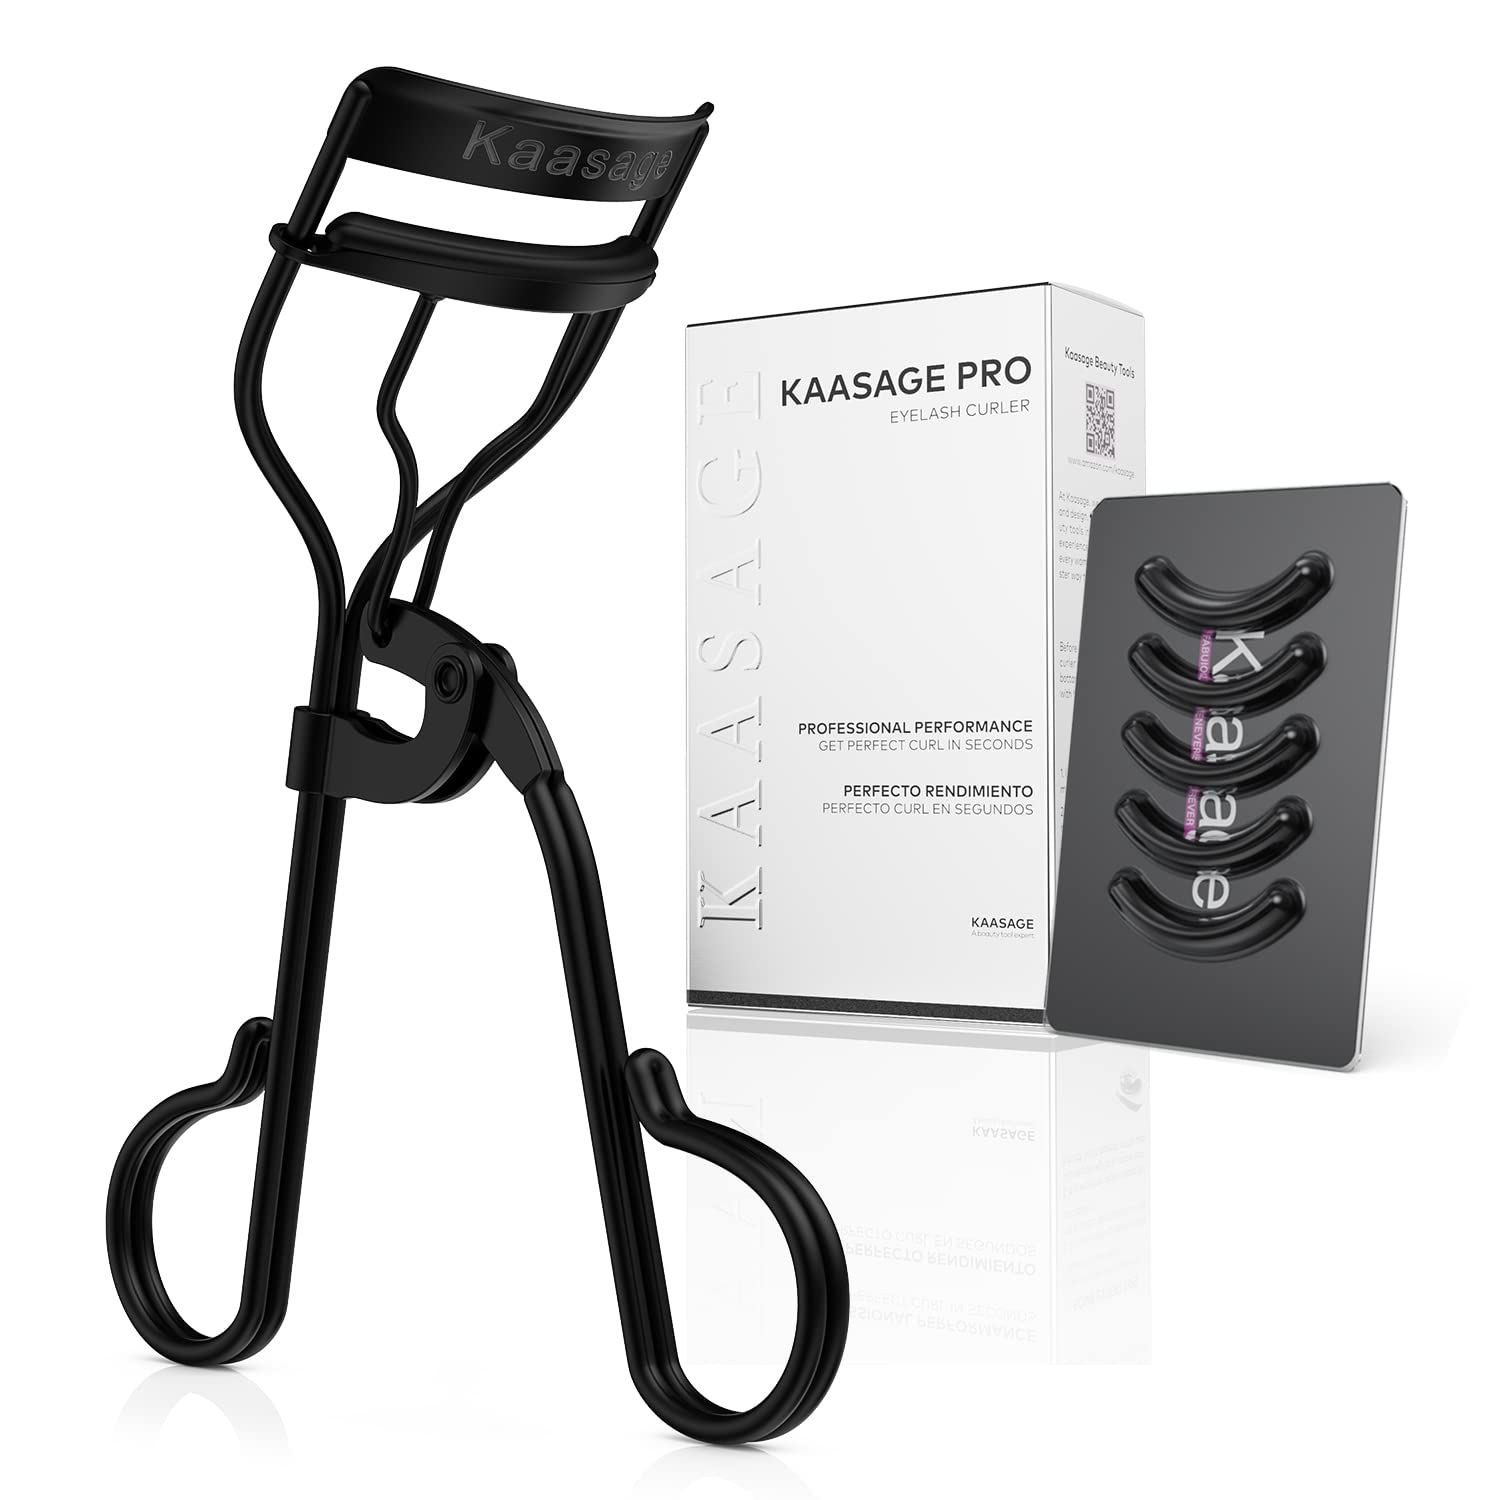 Kaasage Eyelash Curler for Women - Black Professional Lash Curler with  Refill Silicone Pads. Easy to Curl Open-Eye Eyelashes Naturally in Seconds  with No Pinching, No Pulling and Last Long